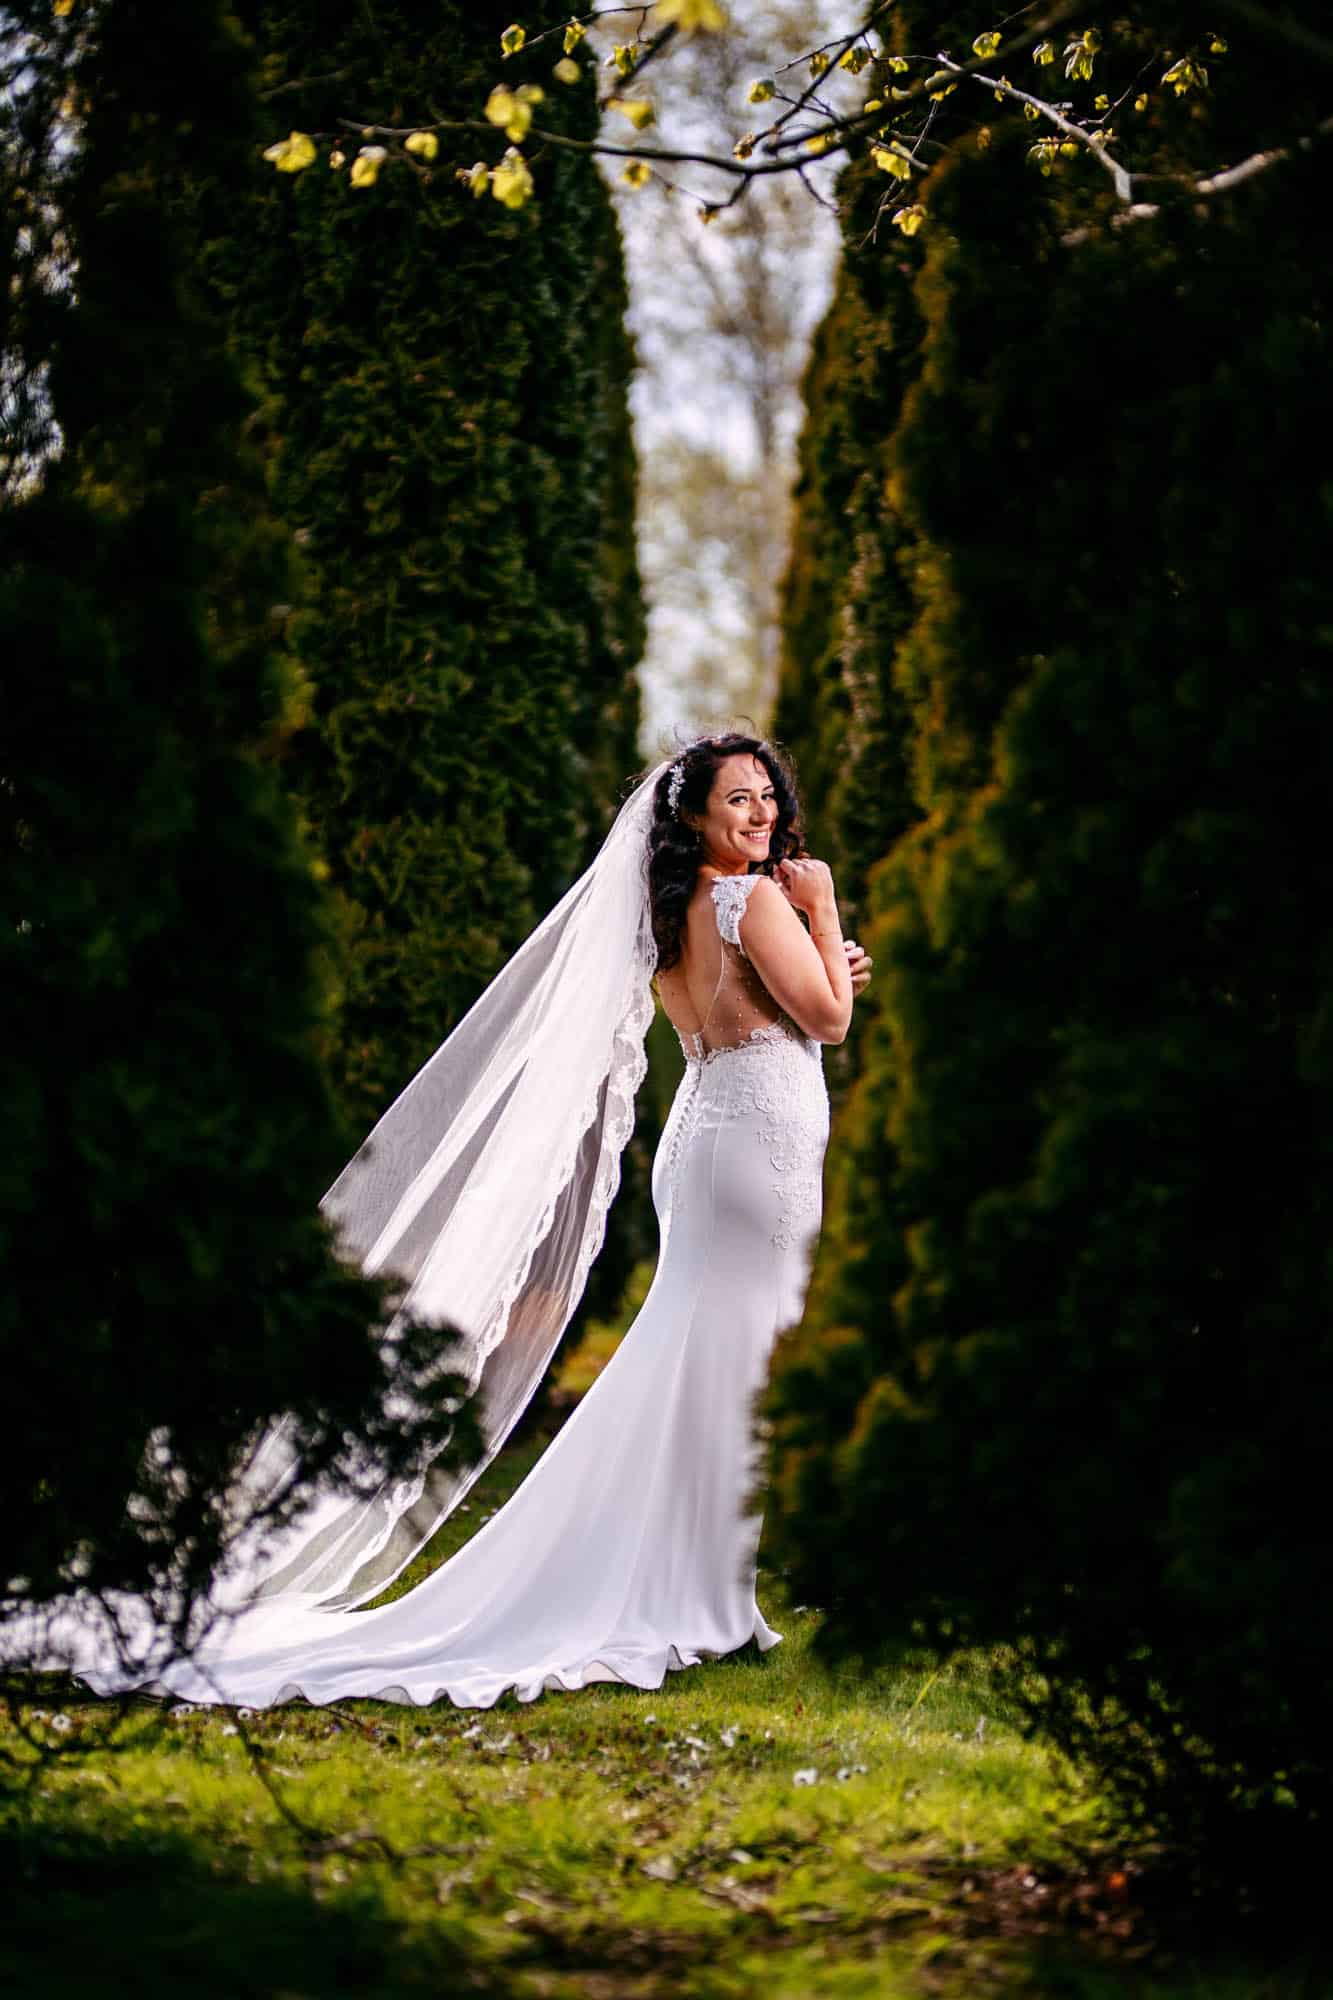 A bride in a wedding dress stands in the middle of the bushes.